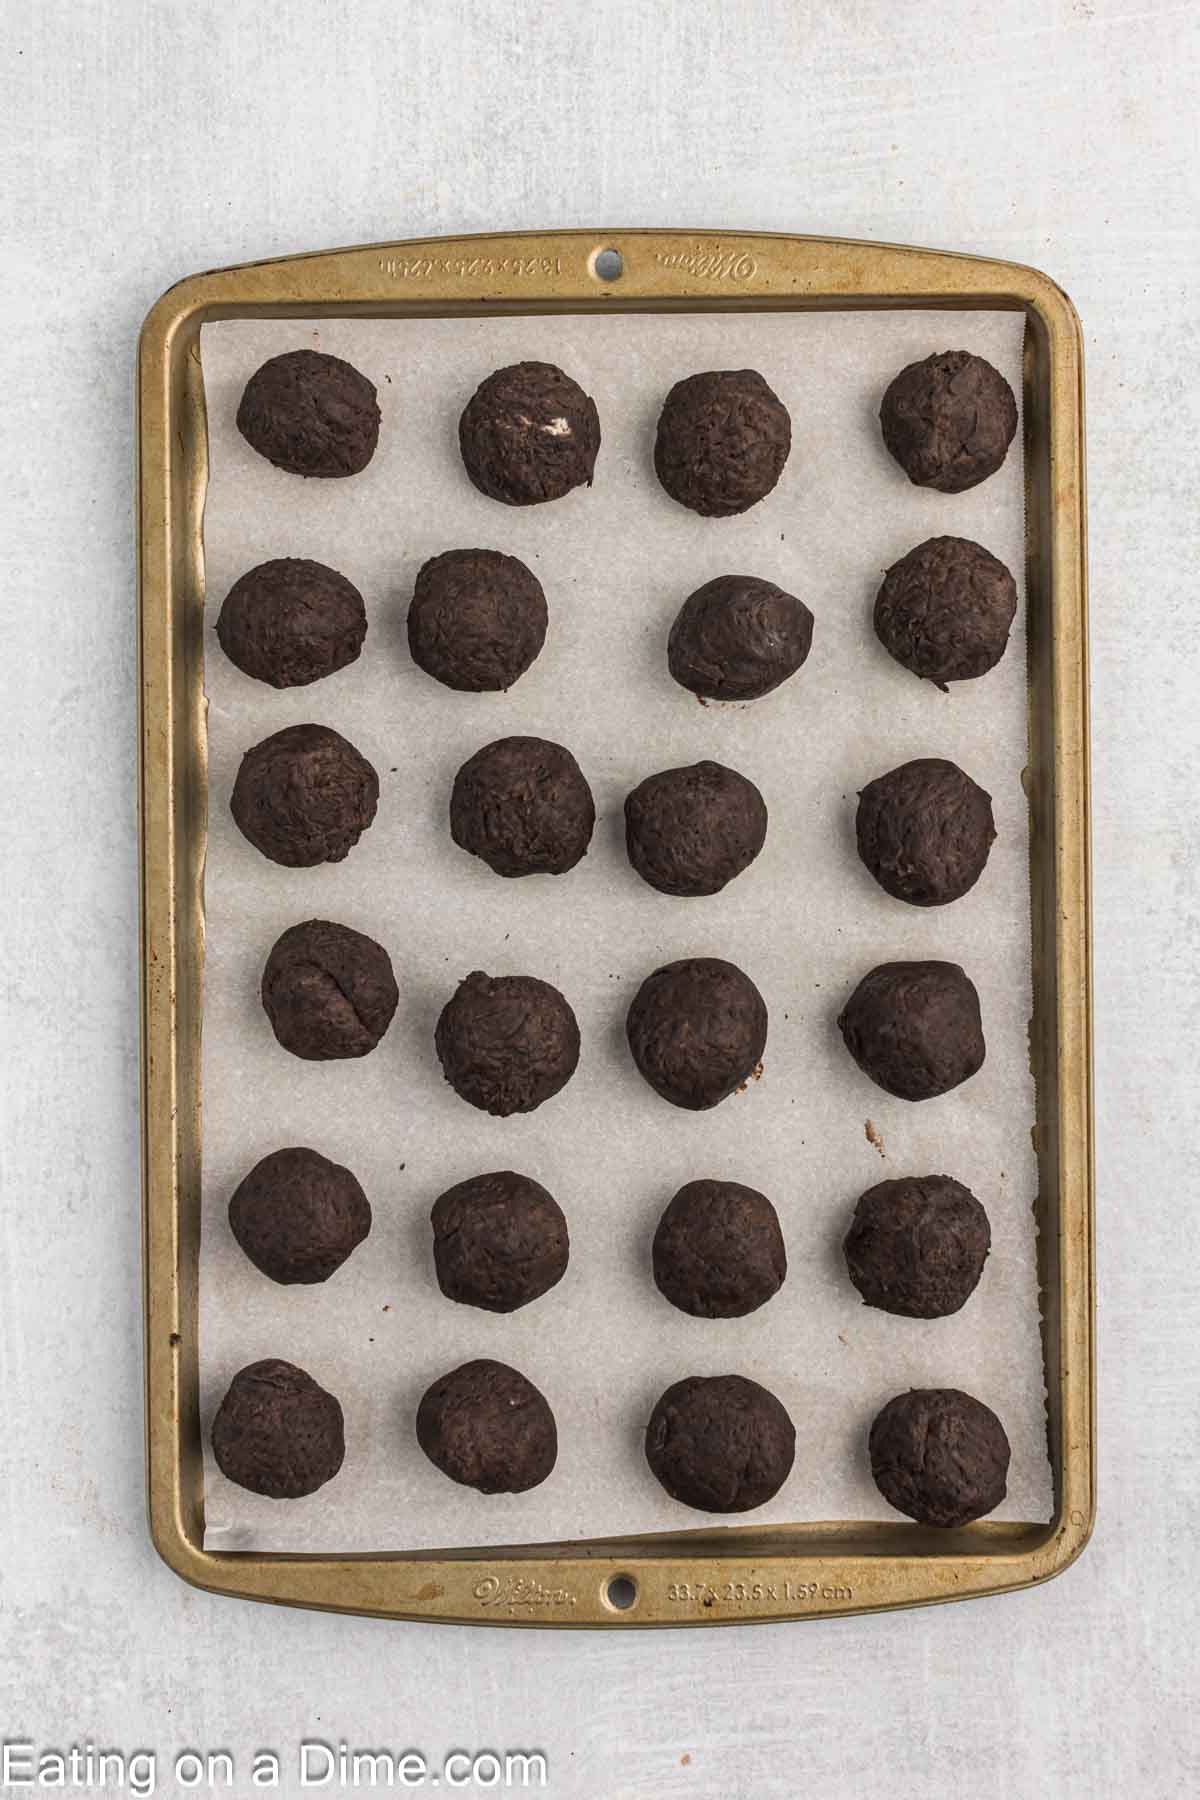 Rolling the Oreo crumbs into balls and placing on a baking sheet